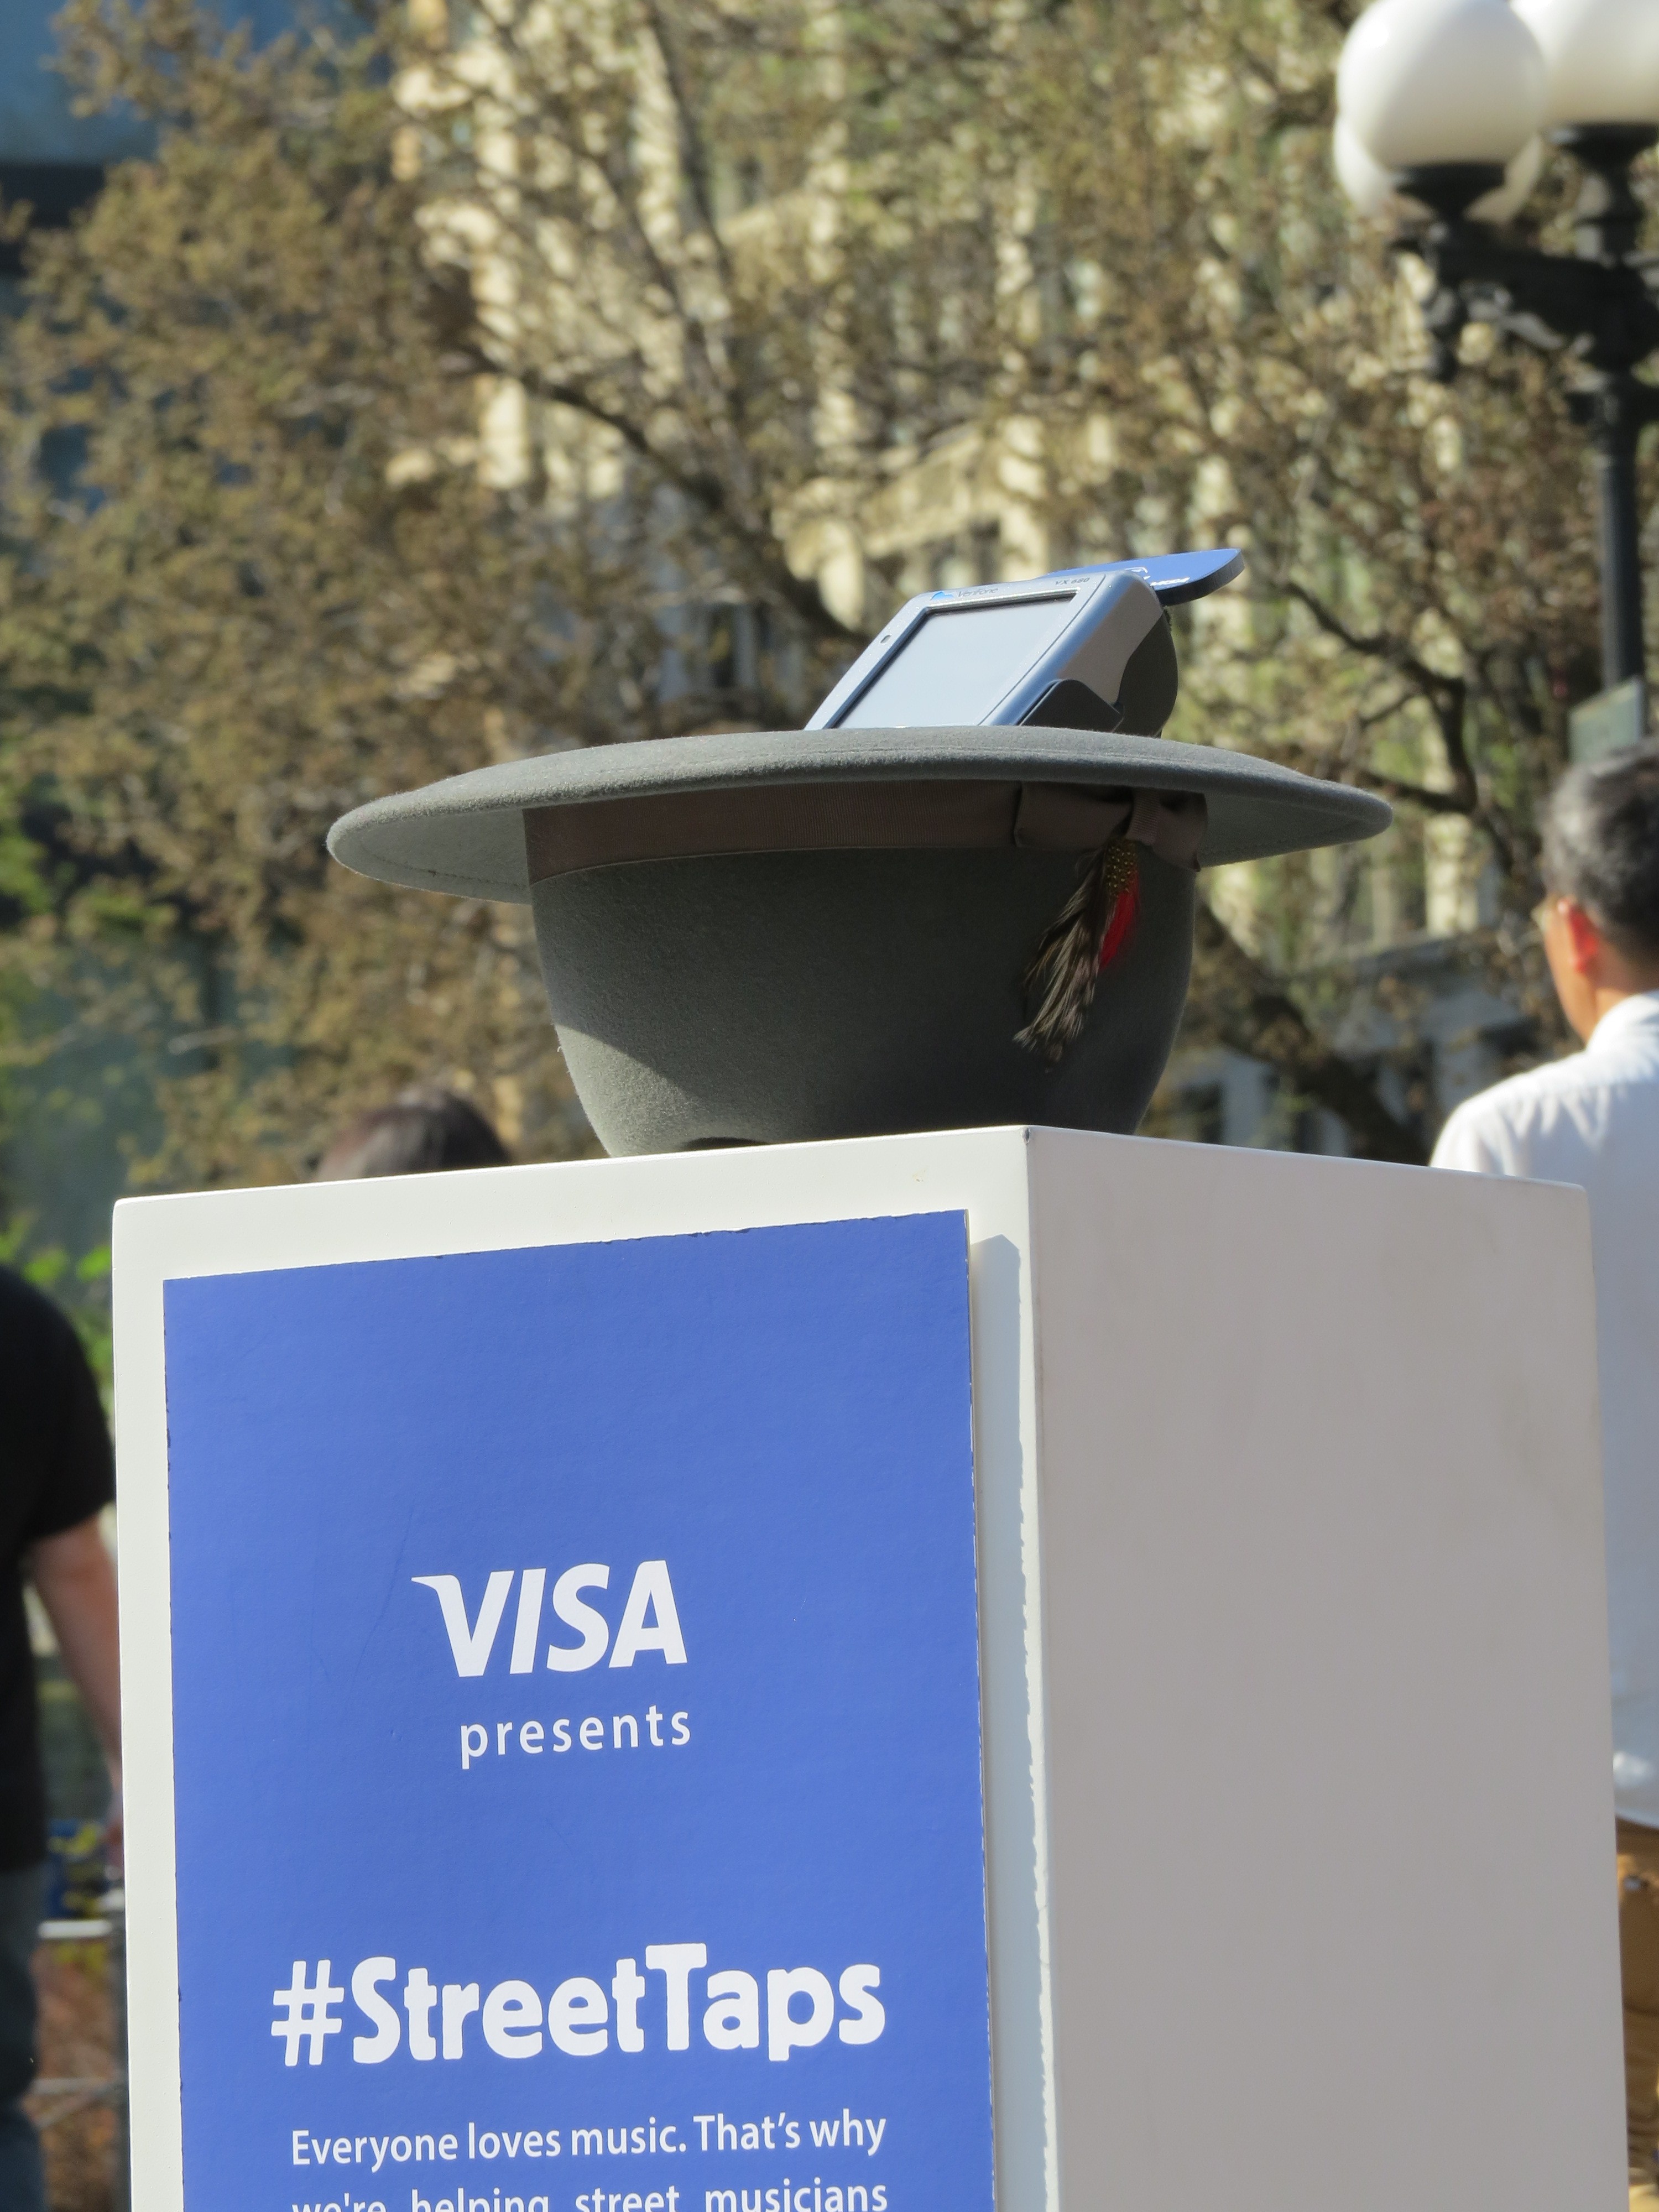 Visa presents #StreetTaps where you can donate money using your credit card